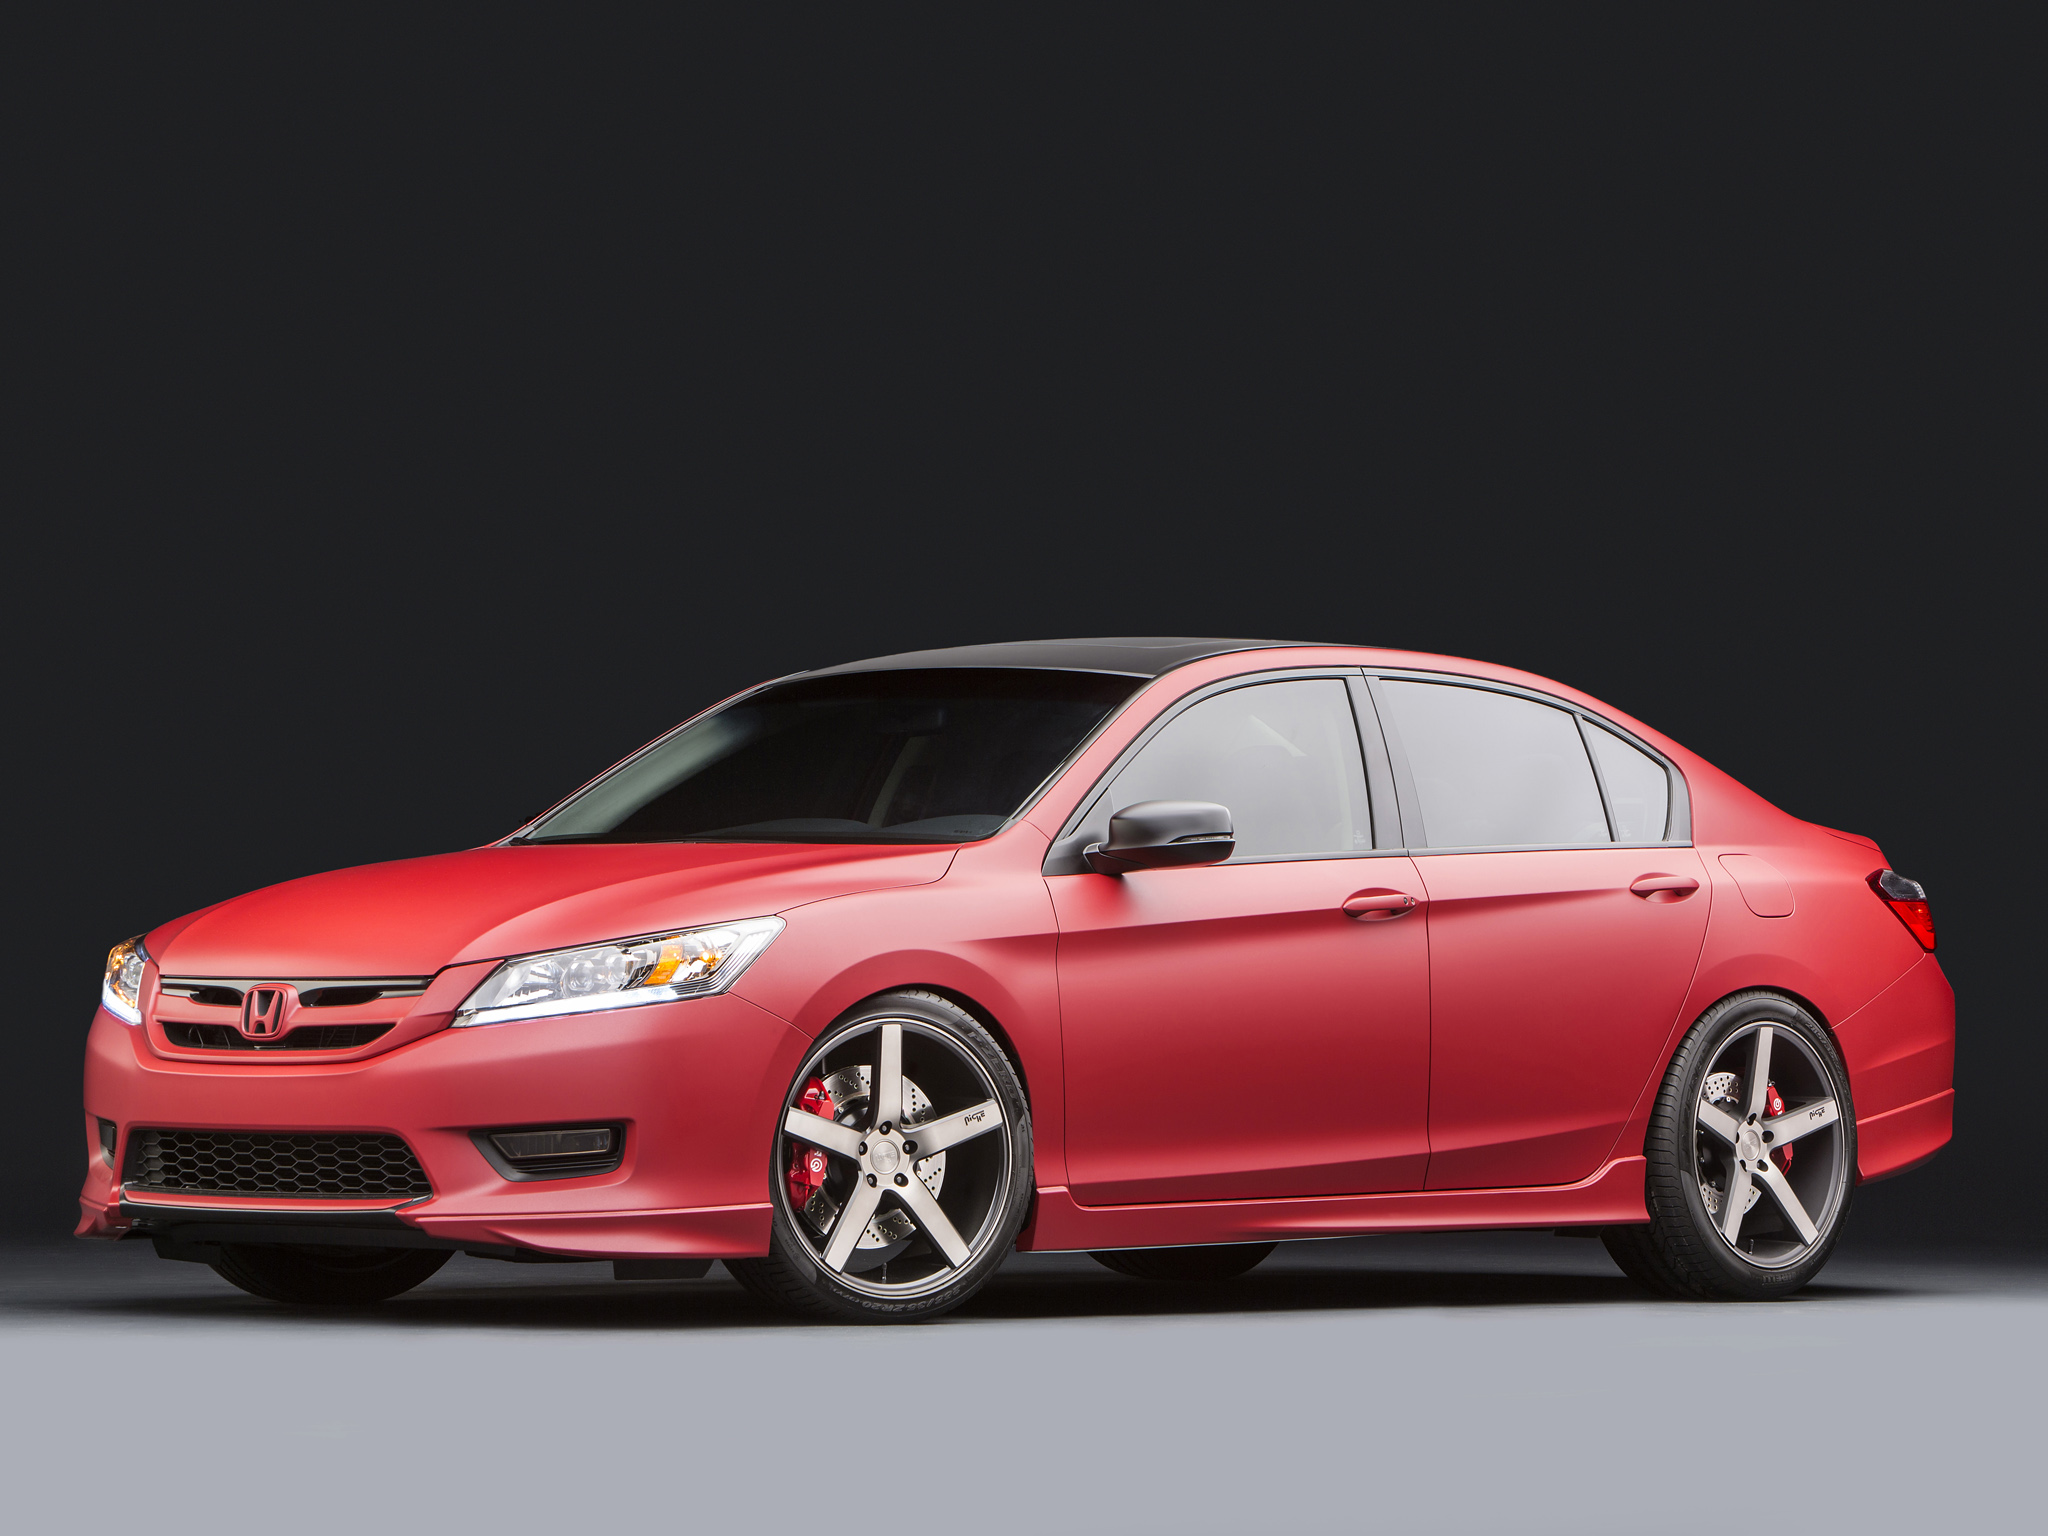 2013, Honda, Accord, By, Mad industries, Tuning Wallpaper